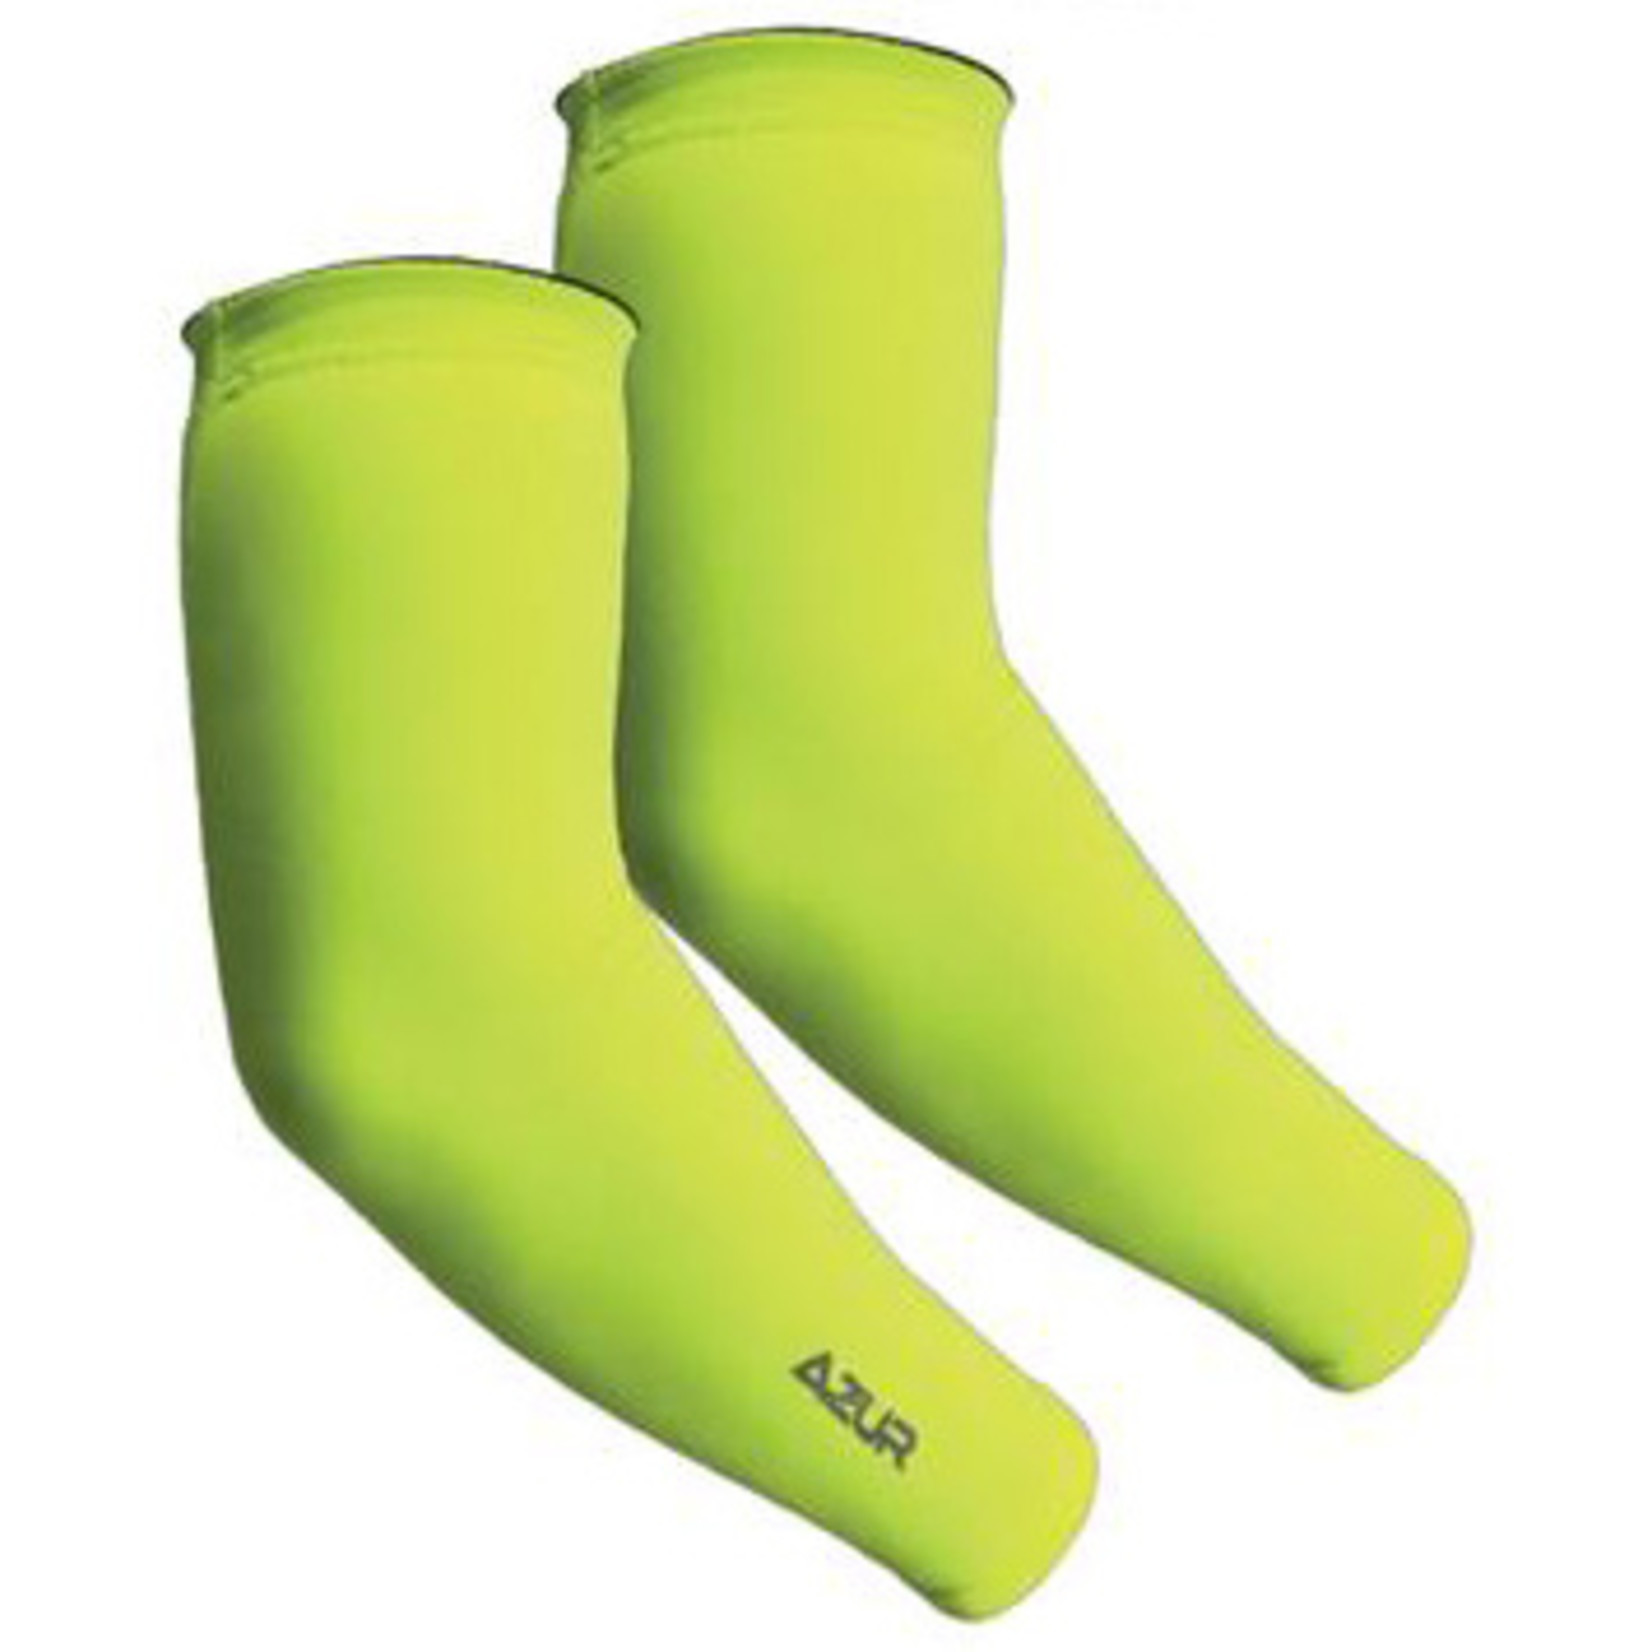 Azur Azur Bike/Cycling Arm Warmers Neon Styled To Fit Comfortably - Large - "Special"